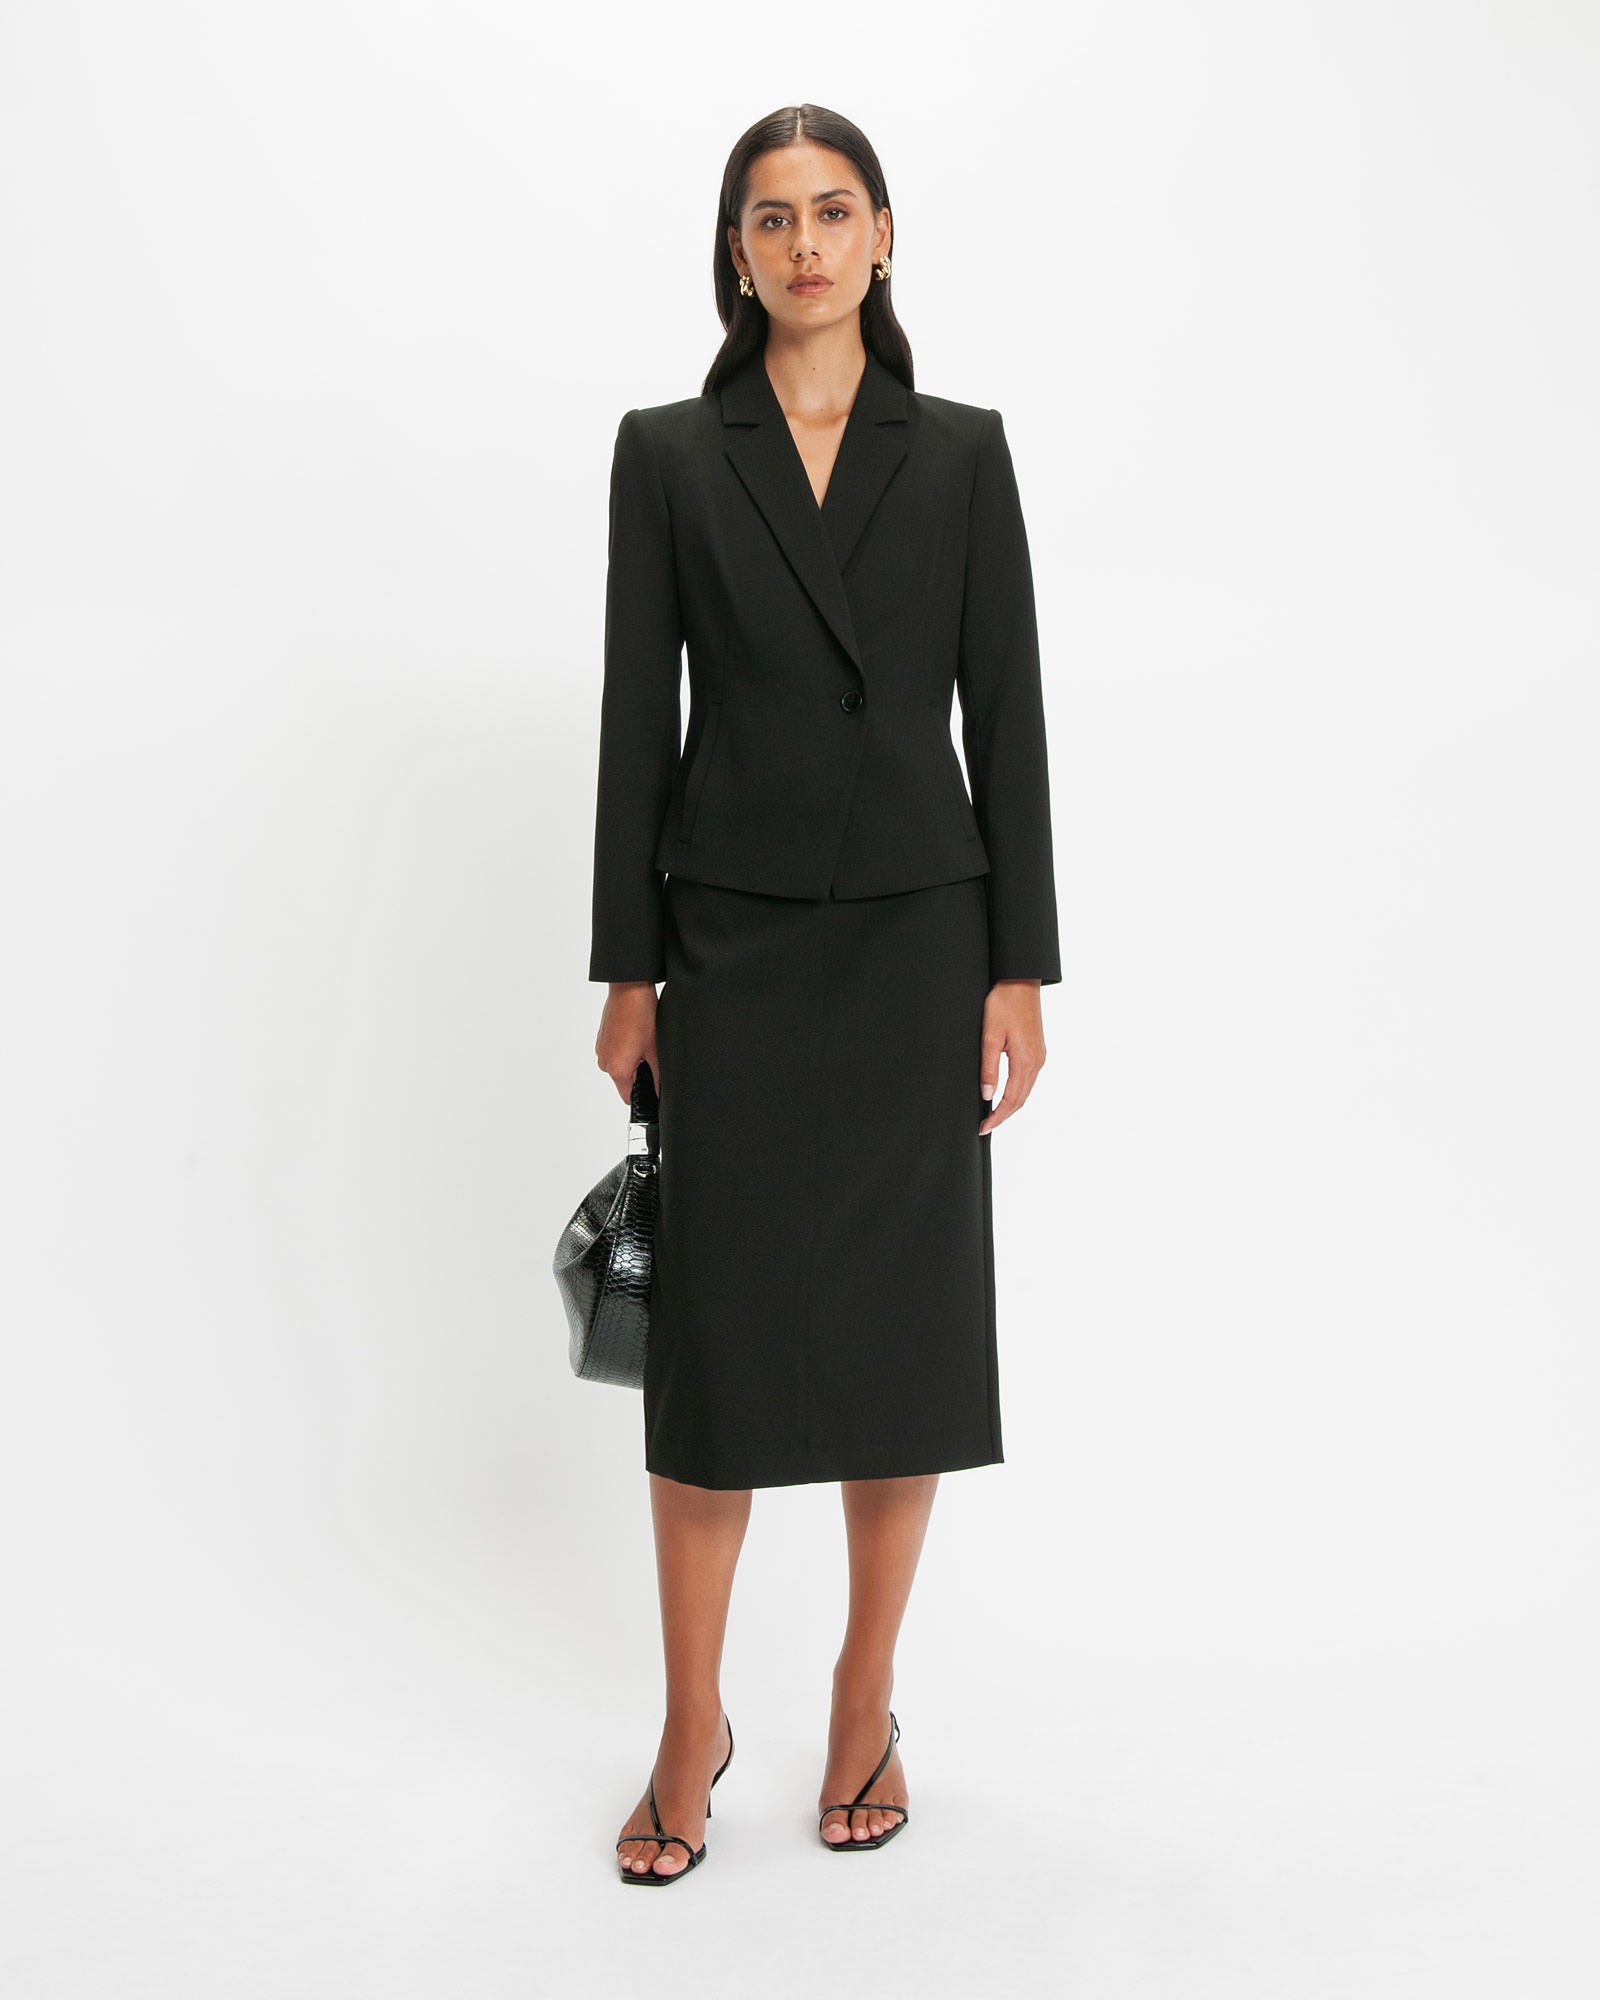 Jackets and Coats | Stretch Suit Cropped Jacket | 990 Black